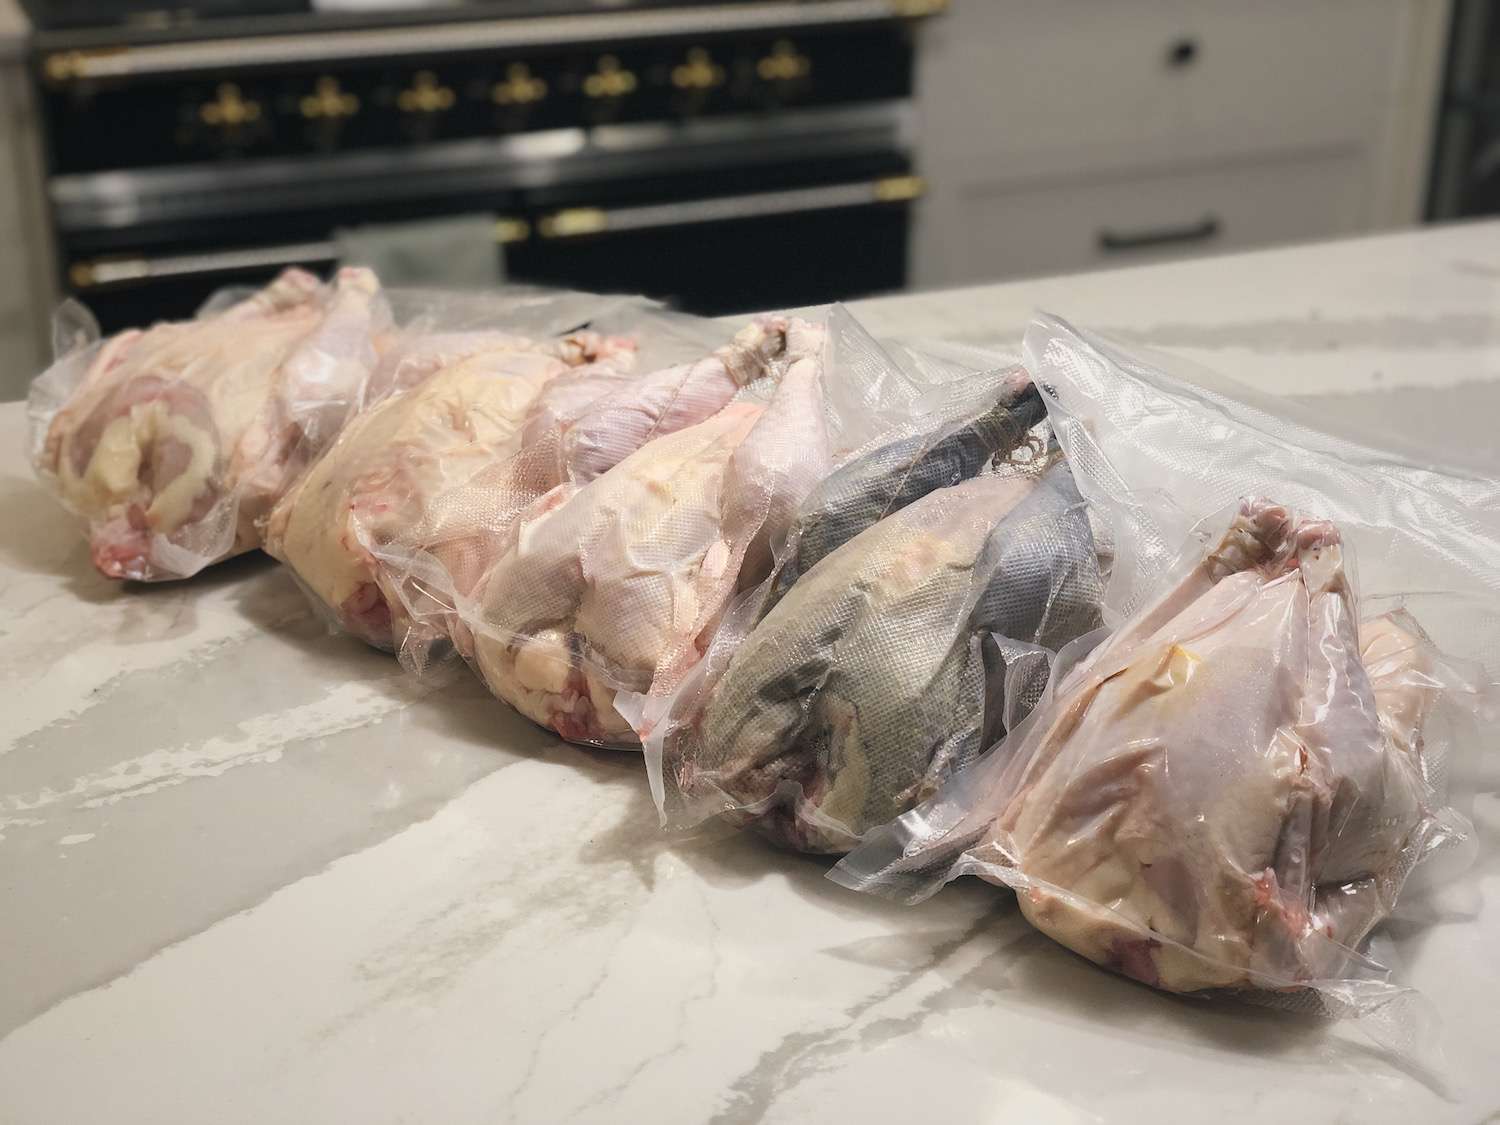 Vacuum sealed rudd ranger meat chickens, but one of them has black skin